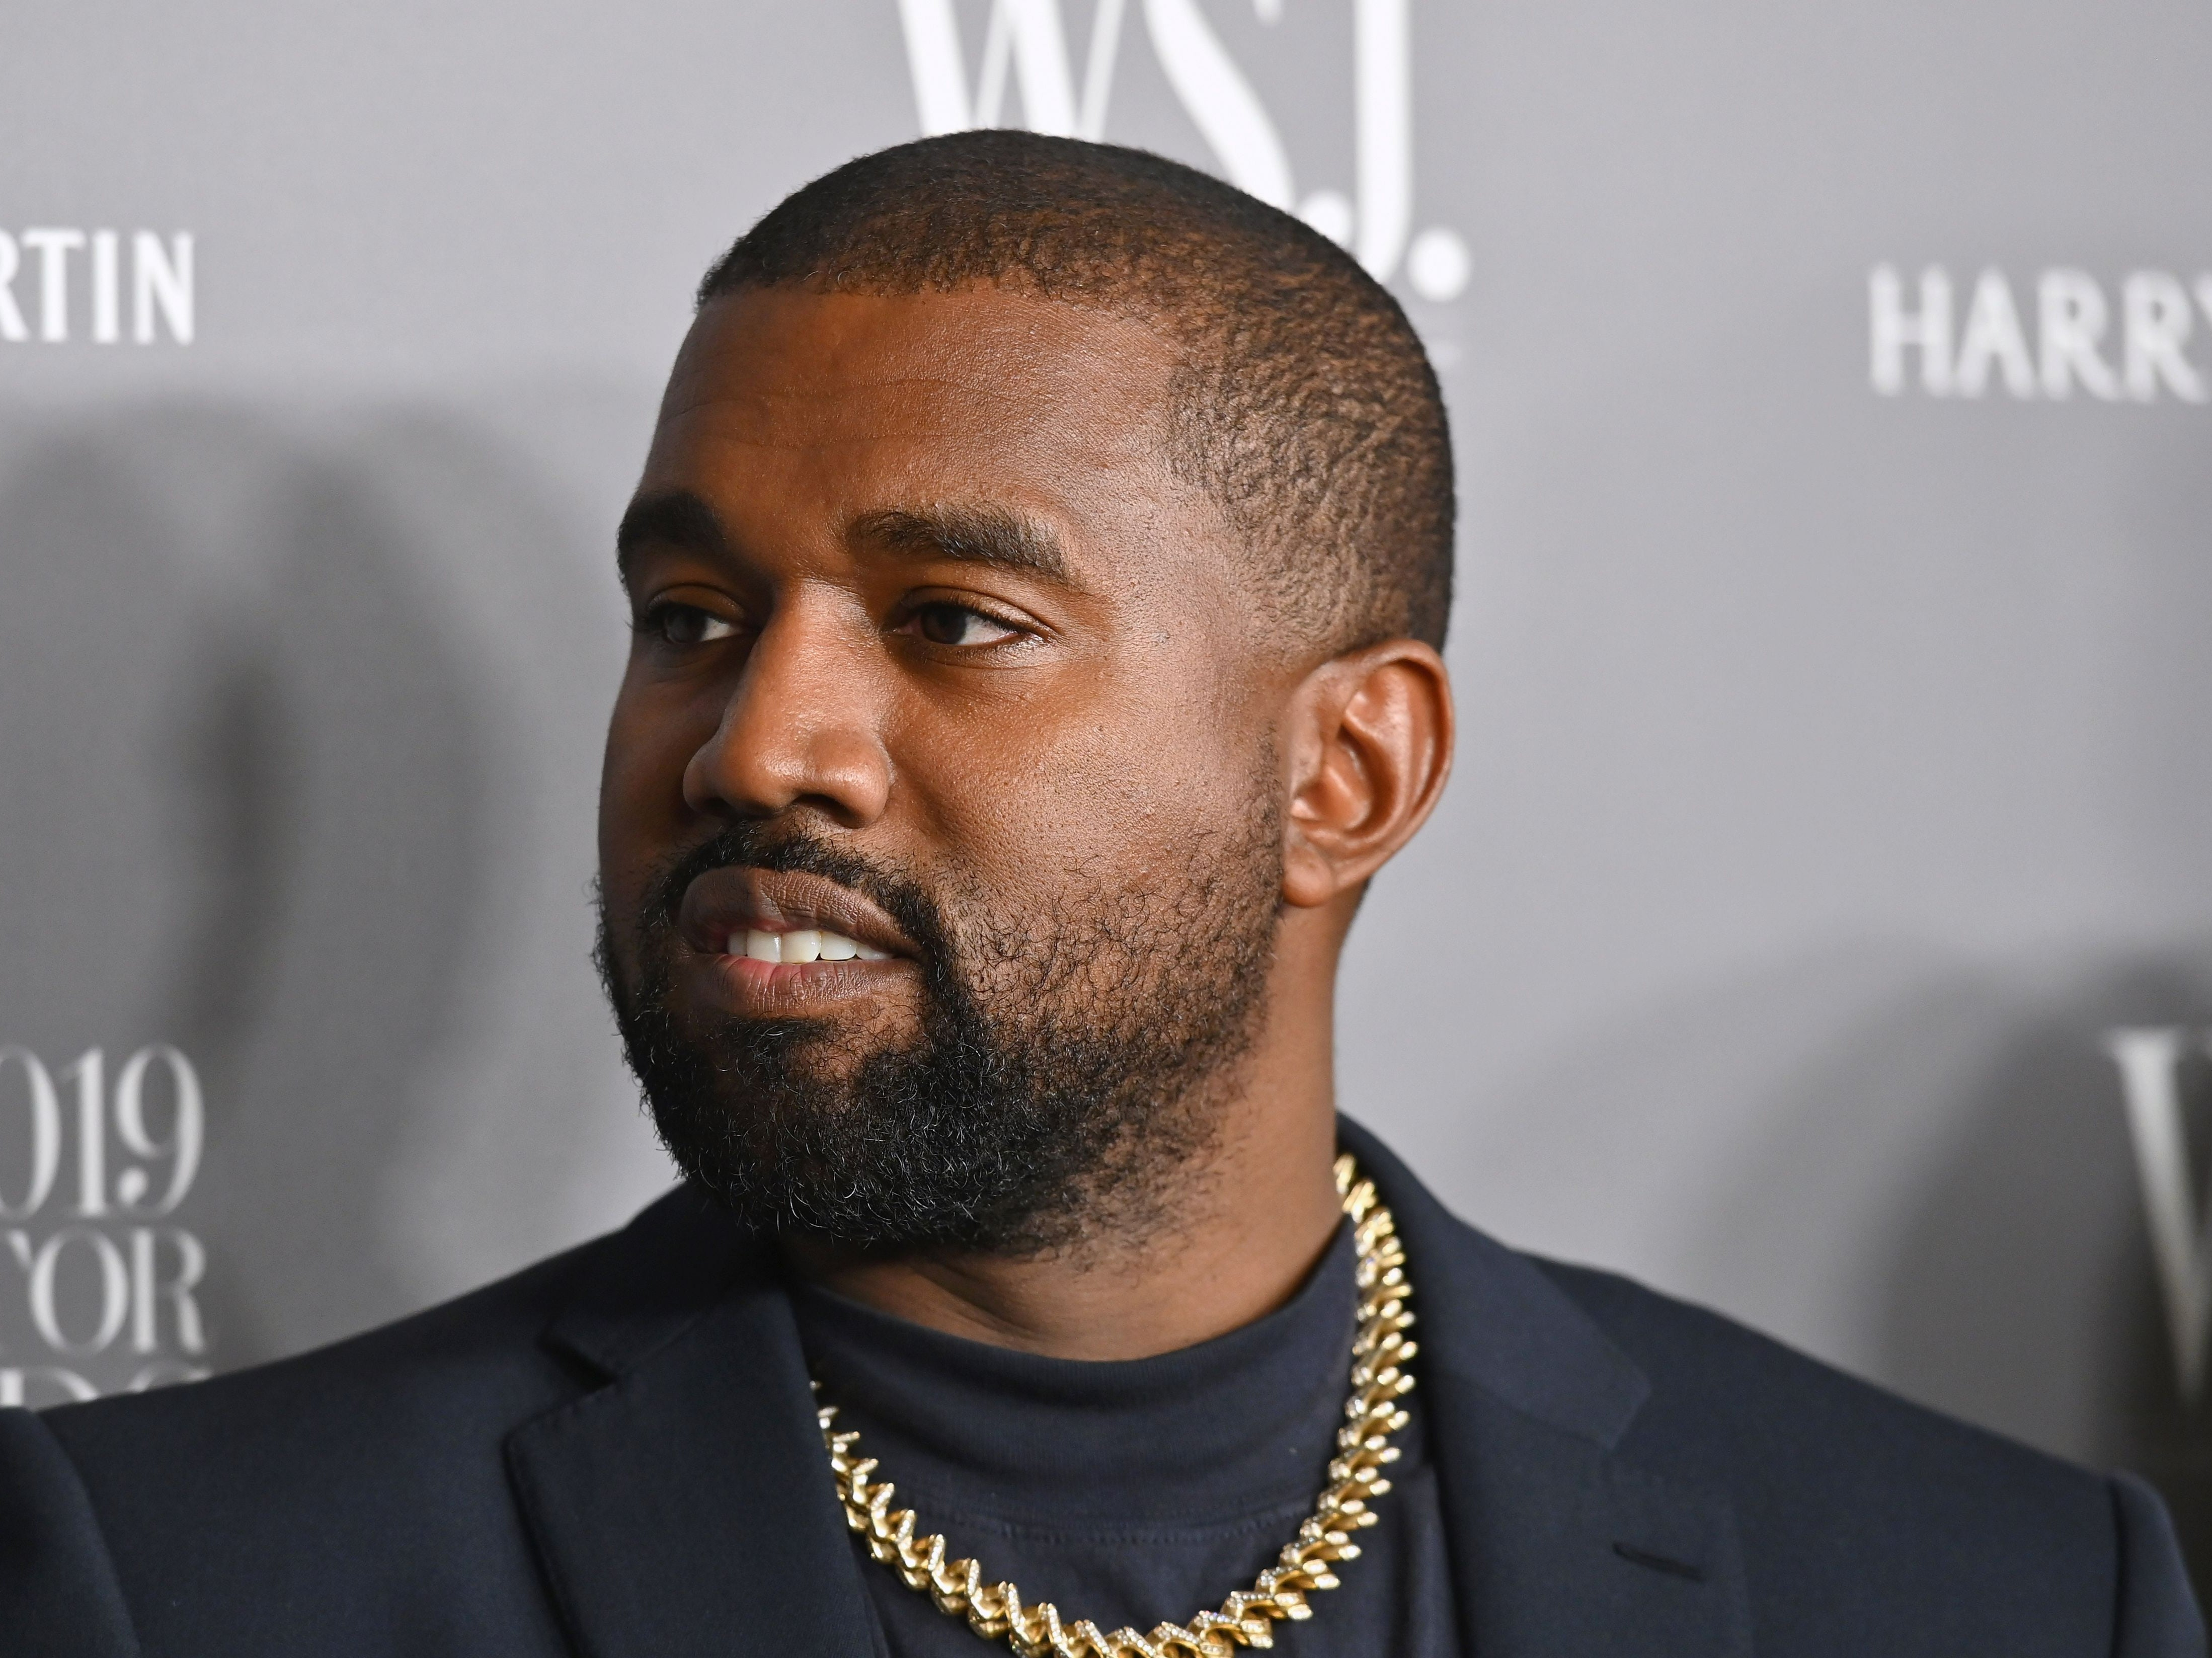 File image: Kanye West, now called Ye, was suspended from Twitter, now called X, for breaking platform’s harmful language rules